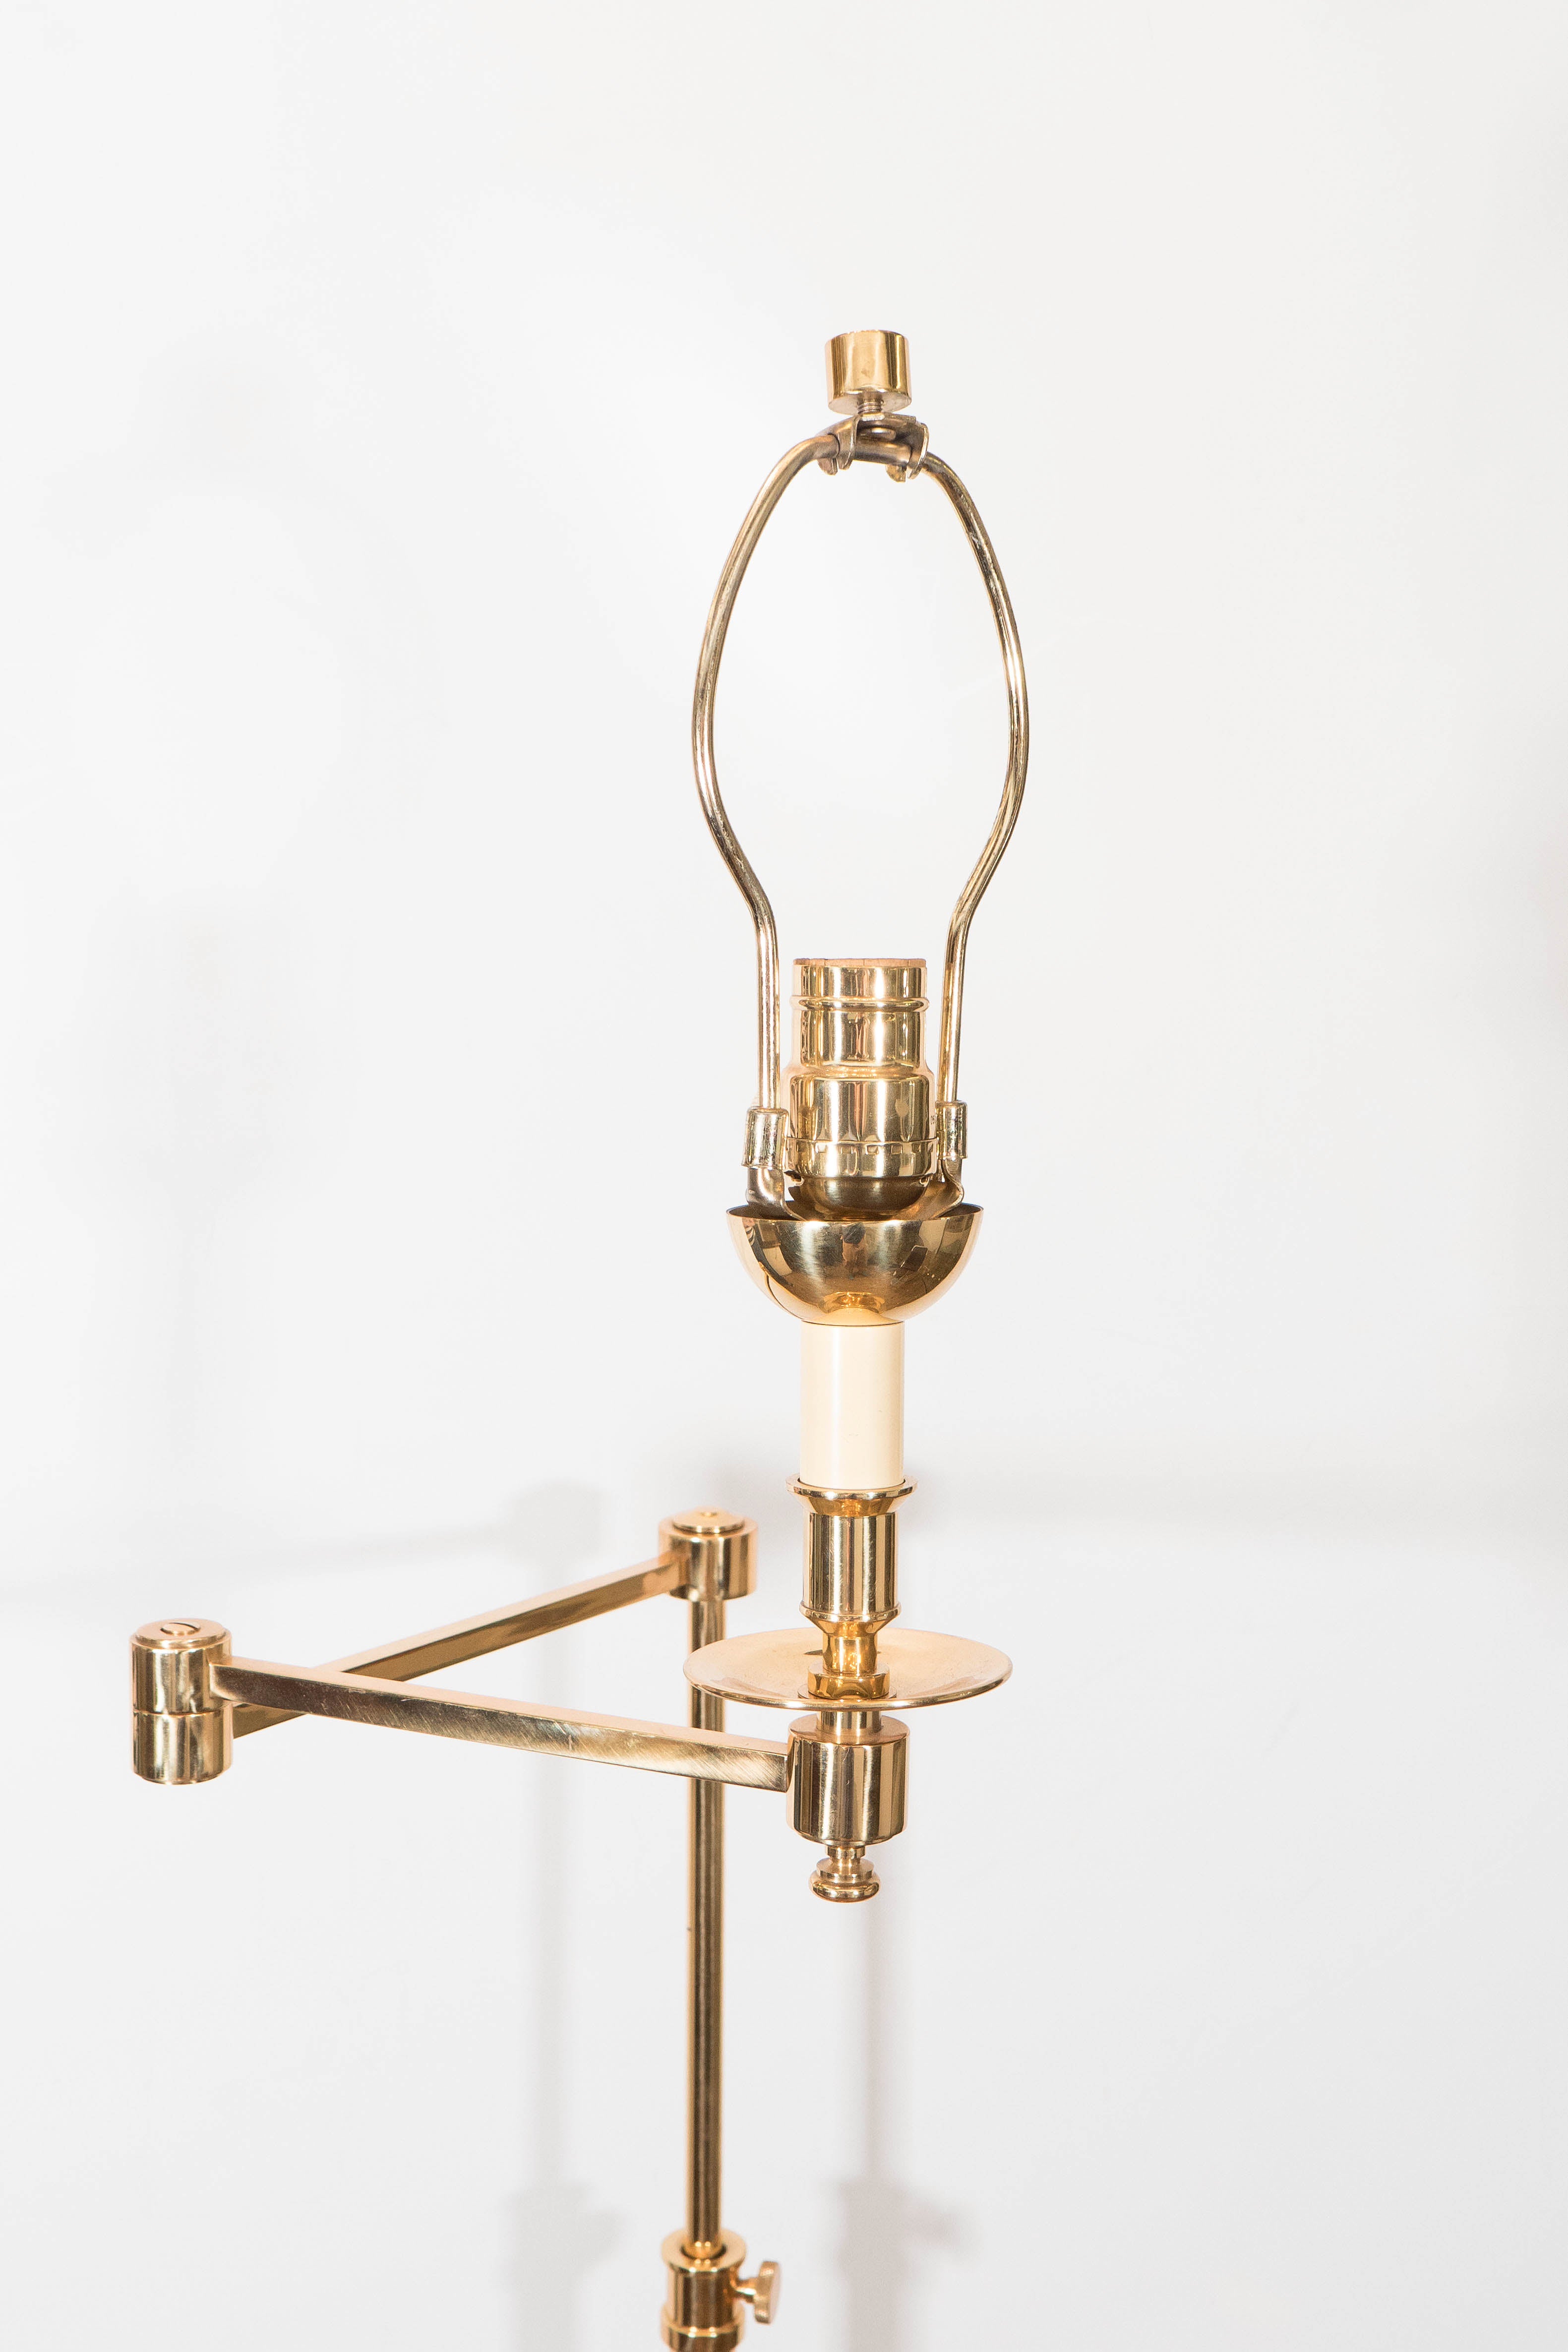 Midcentury Brass Adjustable Floor Lamp with Articulated Arm 3